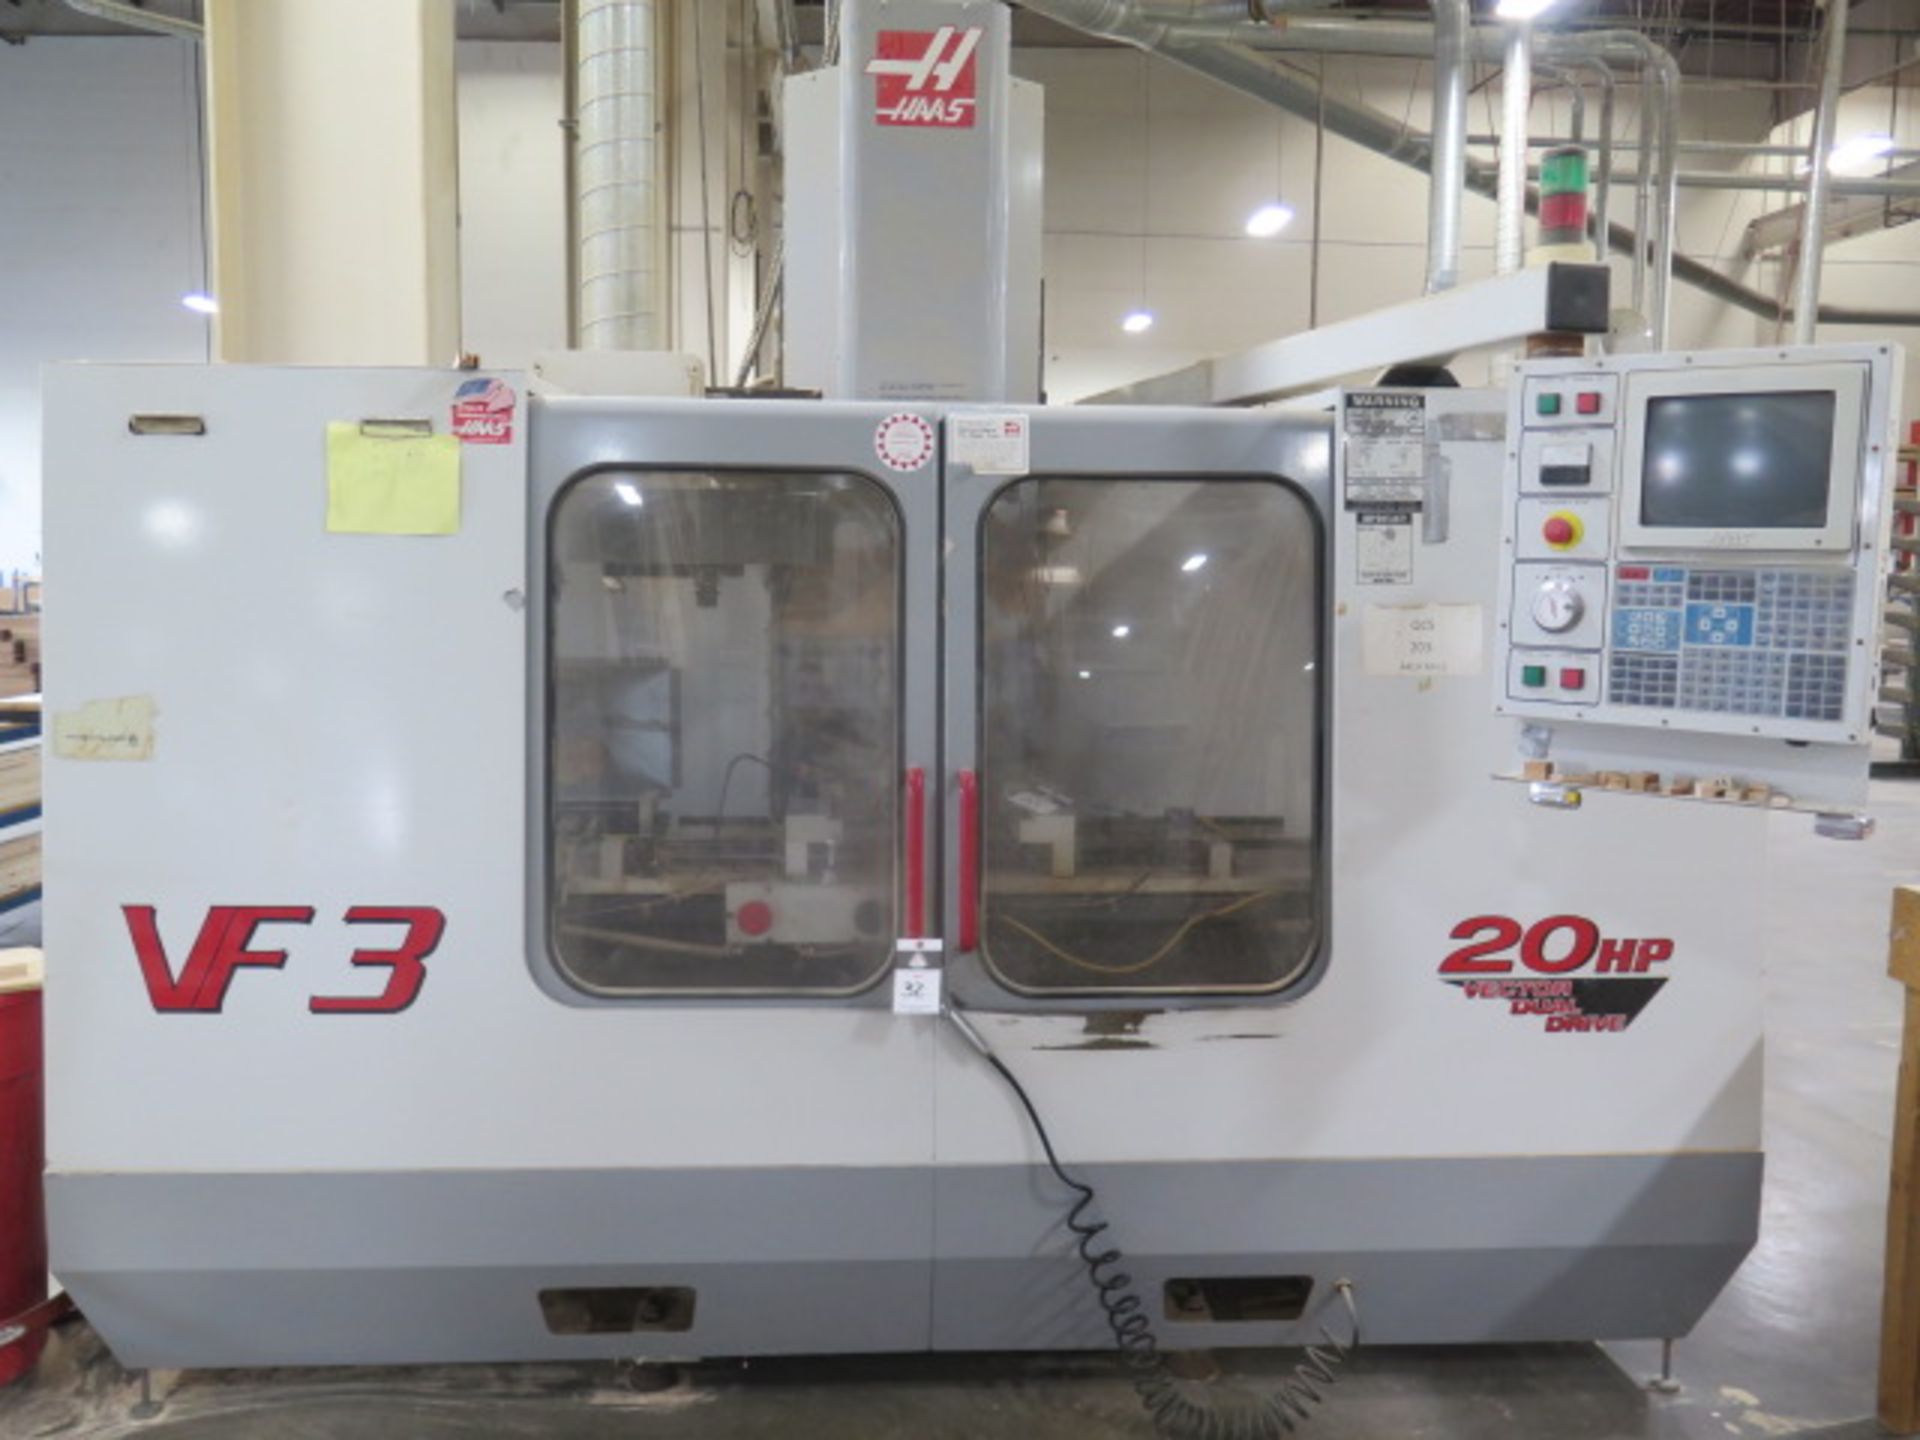 2000 Haas VF-3 CNC VMC s/n 19694 w/ Haas Controls, 20-Station ATC,CAT-40, NO COOLER TANK, SOLD AS IS